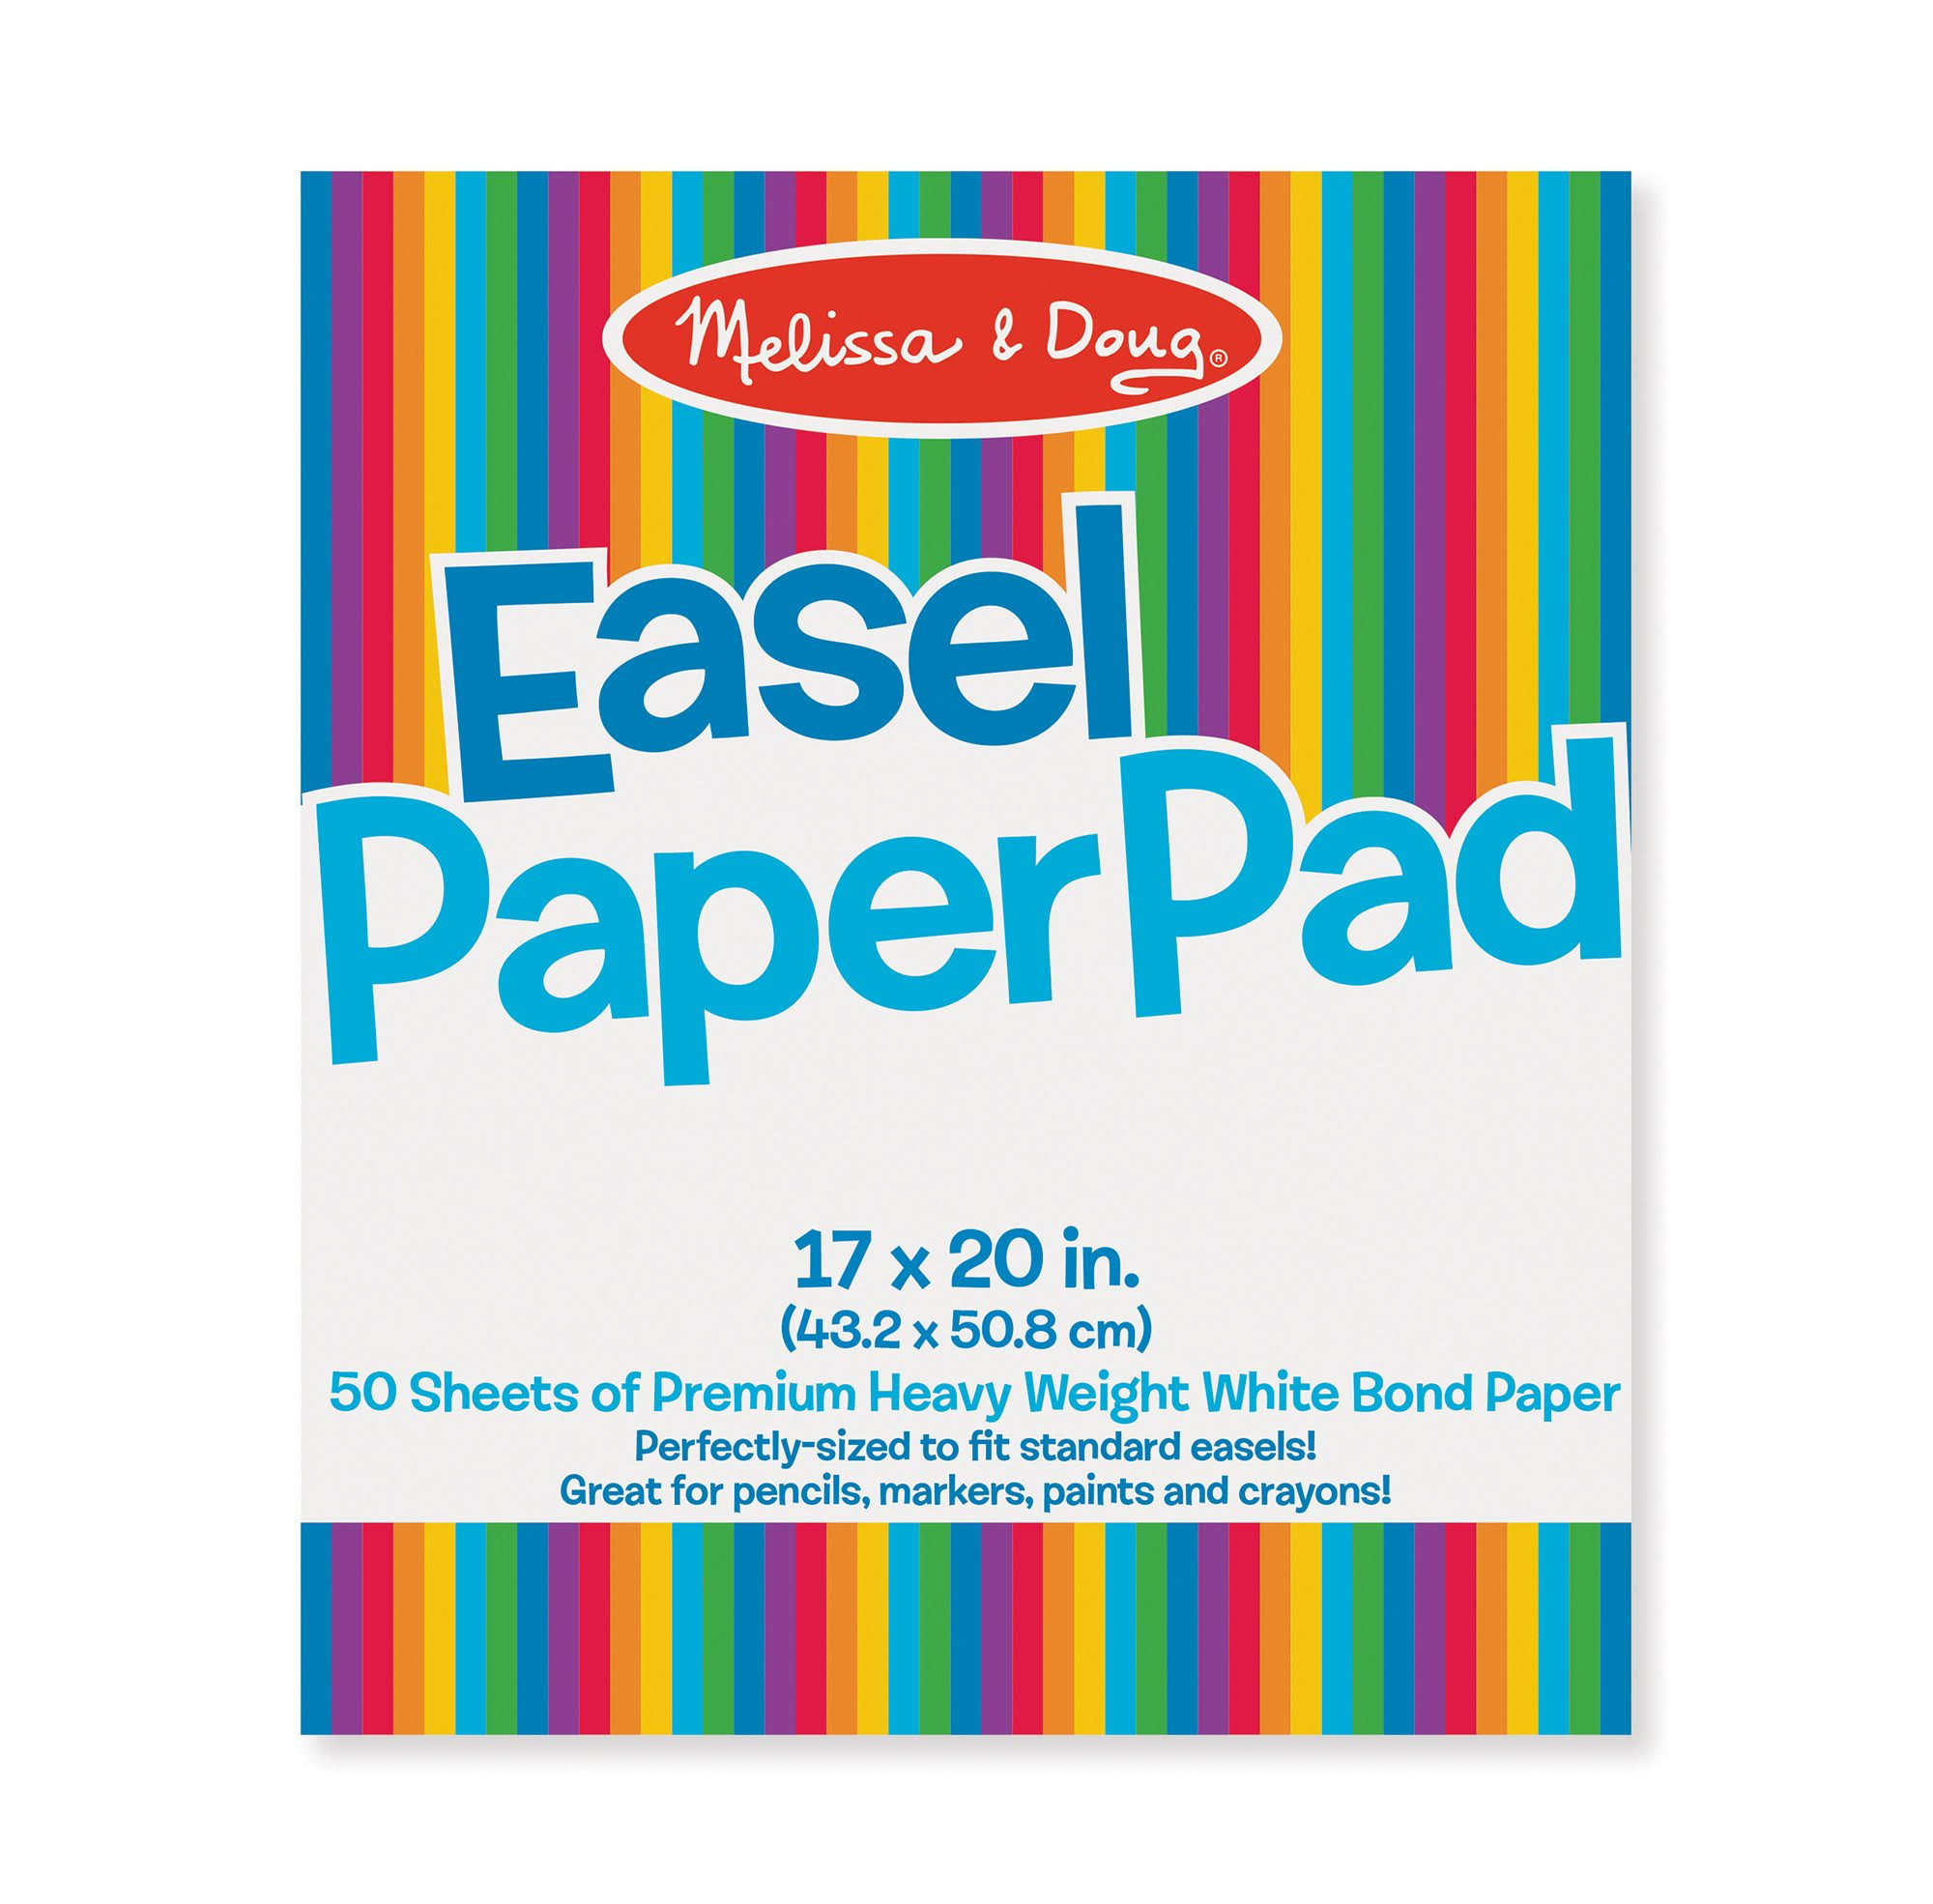 Melissa & Doug Easel Pad - 17in x 20in